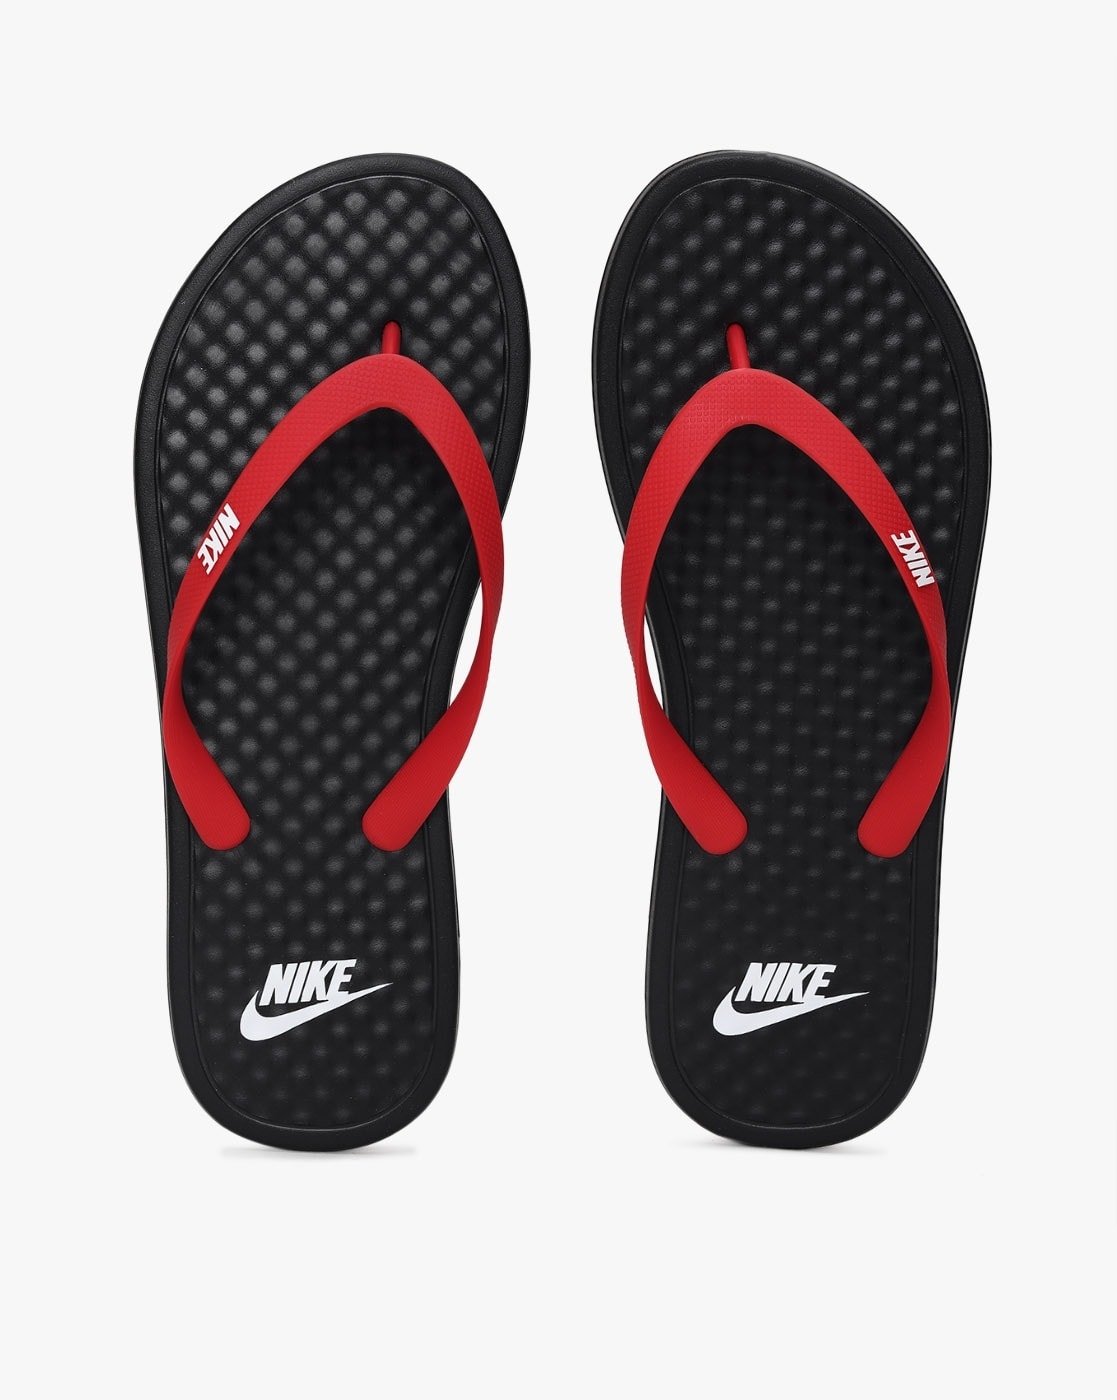 NIKE Men CHROMA THONG 5 Slippers - Buy ANTHRACITE/ARMORY NAVY-ANTHRACITE  Color NIKE Men CHROMA THONG 5 Slippers Online at Best Price - Shop Online  for Footwears in India | Flipkart.com